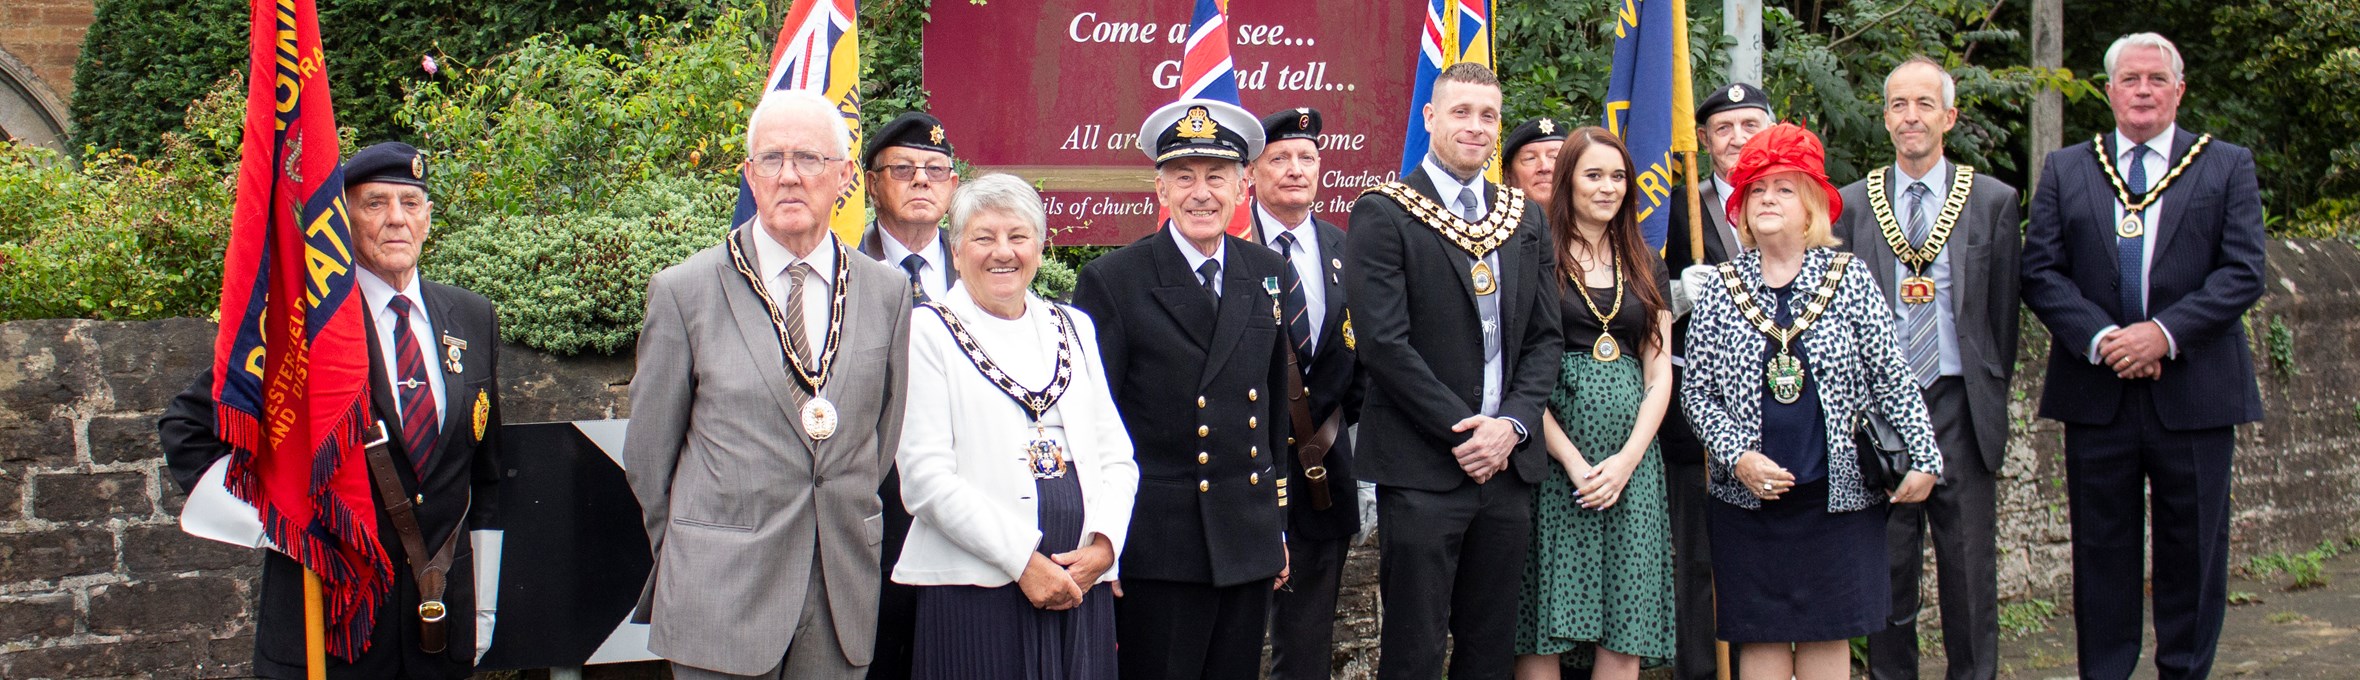 Cllr Grounds with members of Mansfield and Ashfield Branch of the Merchant Navy Association